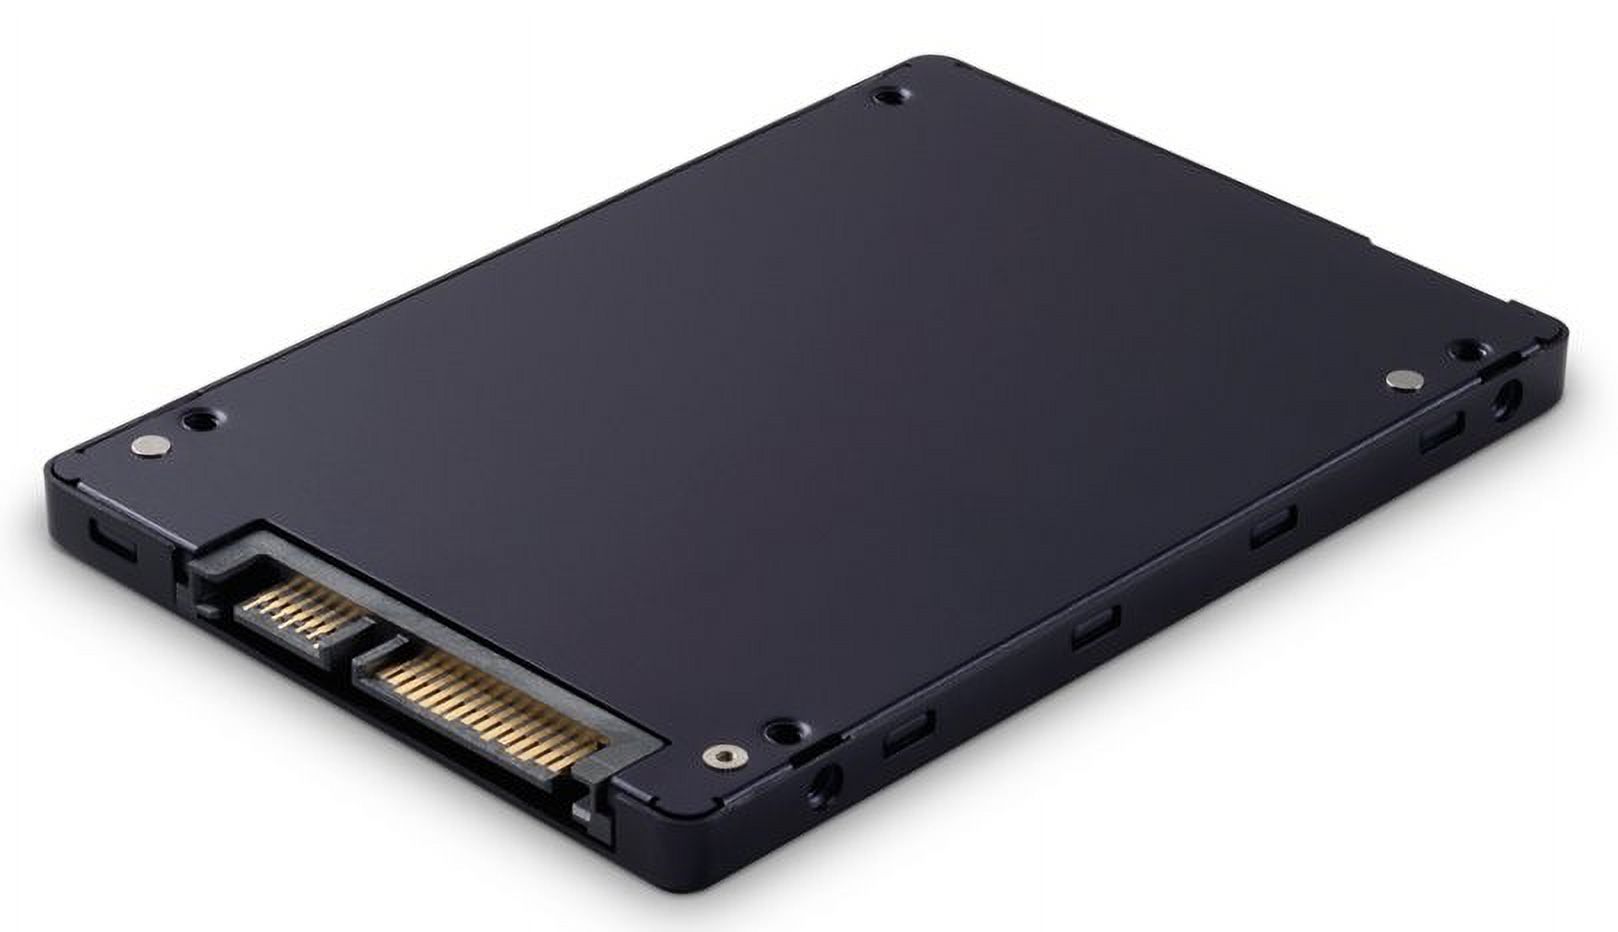 Lenovo 7SD7A05763 960 GB 2.5" Internal Solid State Drive - image 2 of 2